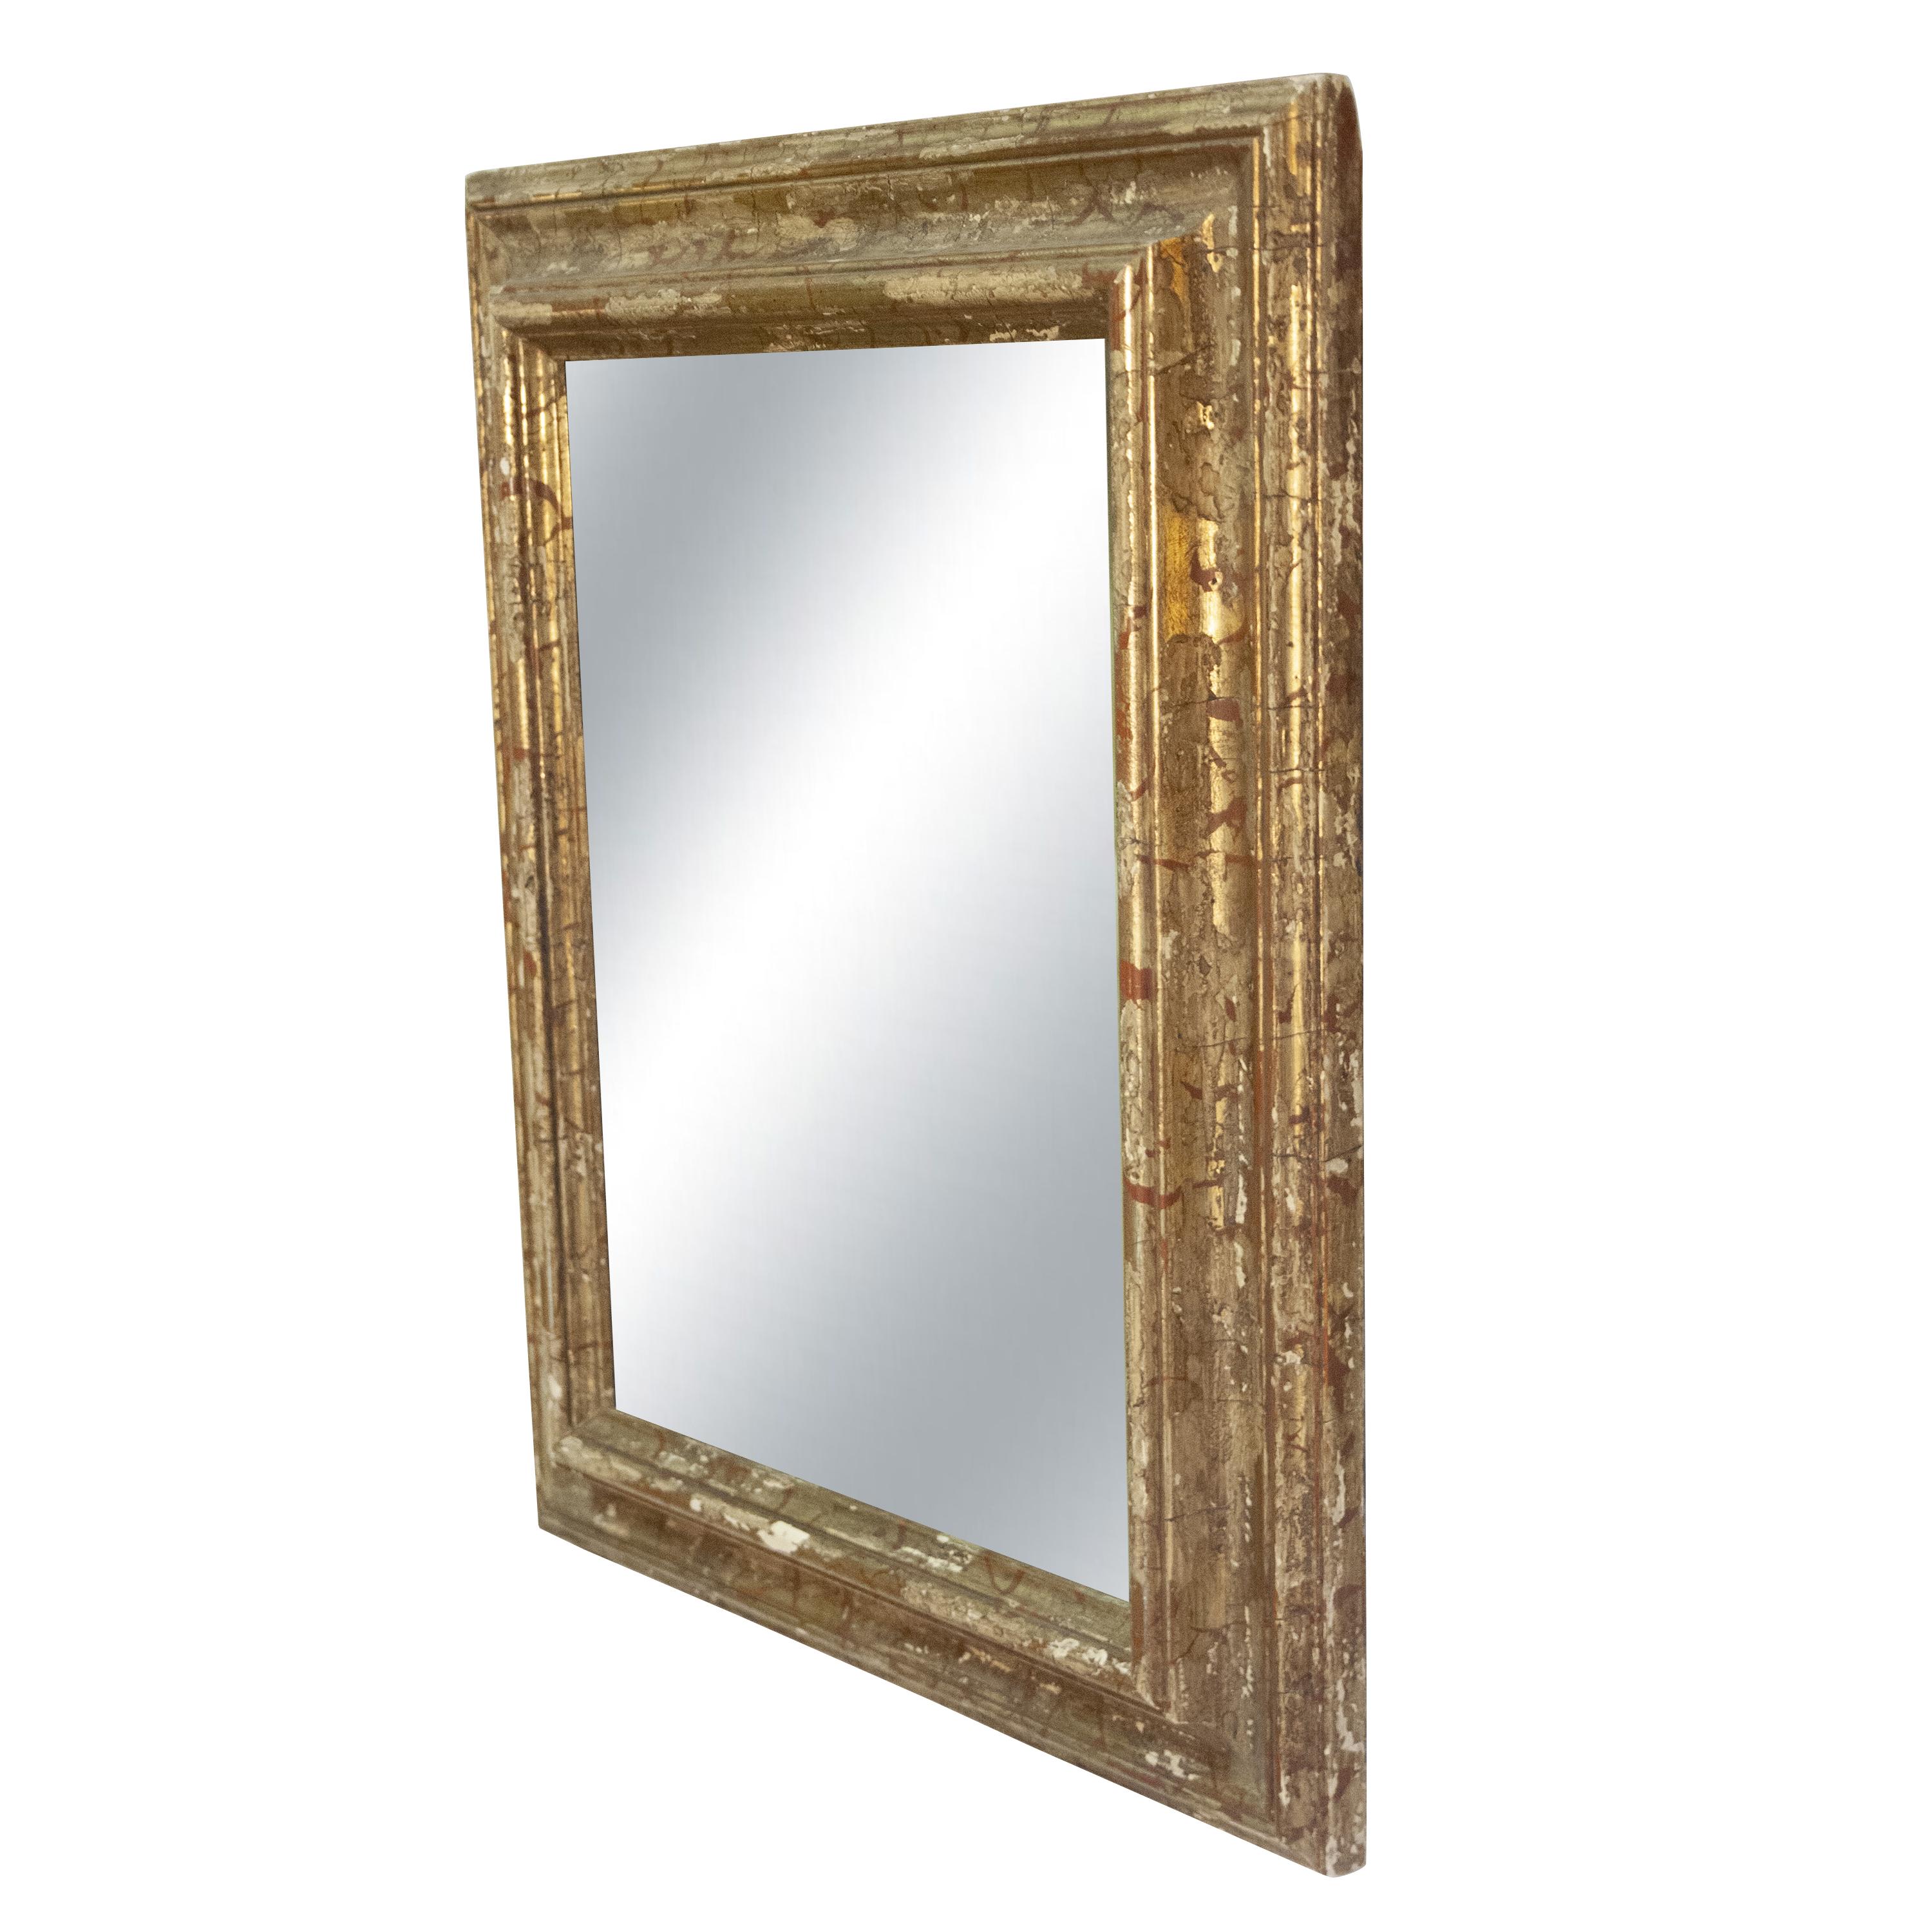 Handcrafted carved Regency style wood mirror covered in gold foil.